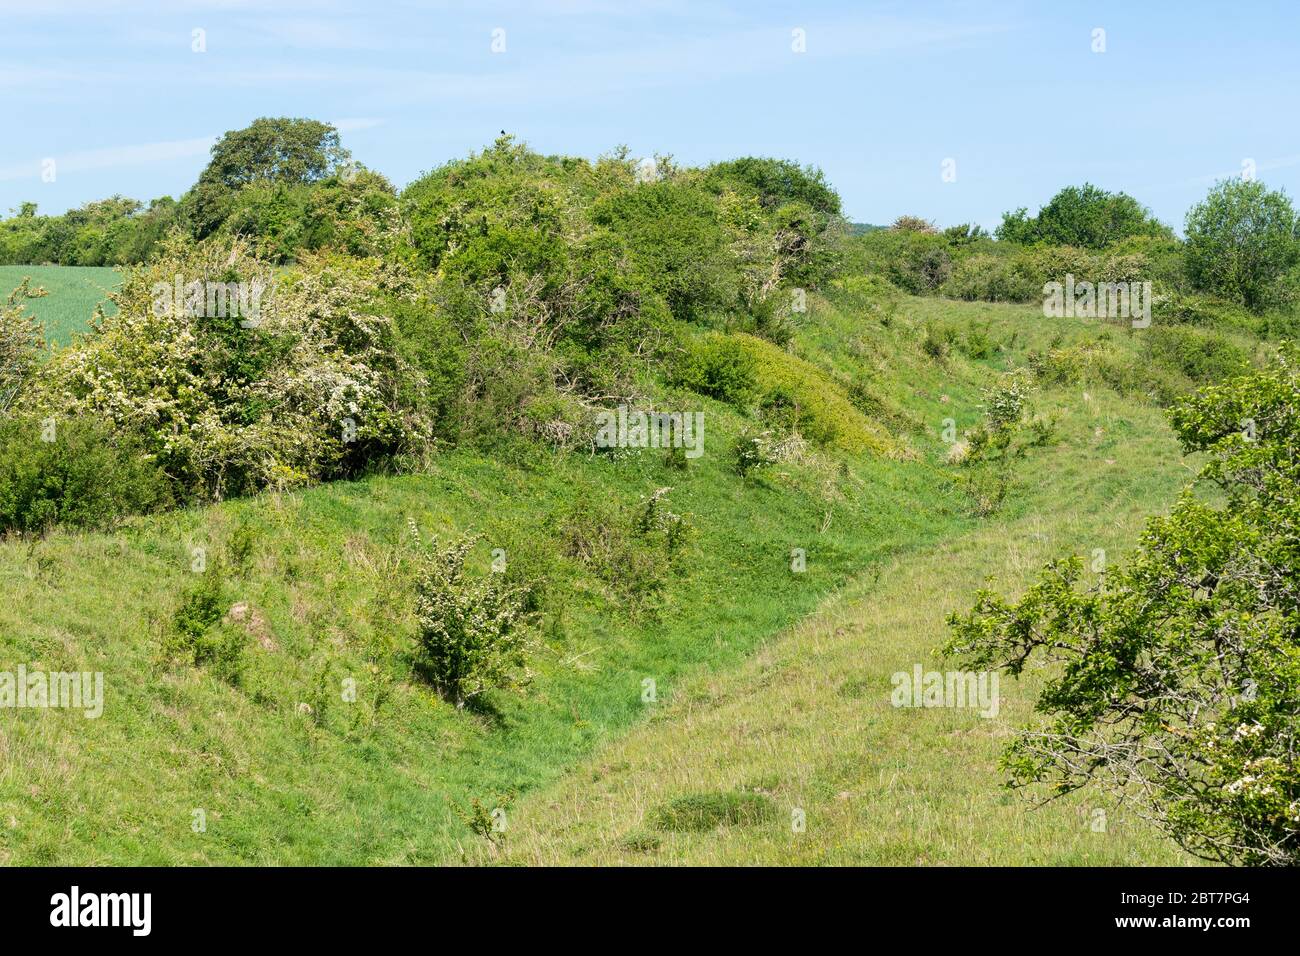 Martin Down National Nature Reserve, chalk downland landscape in Hampshire, England, UK, with the Bokerley Dyke (Ditch), a historic linear earthwork. Stock Photo